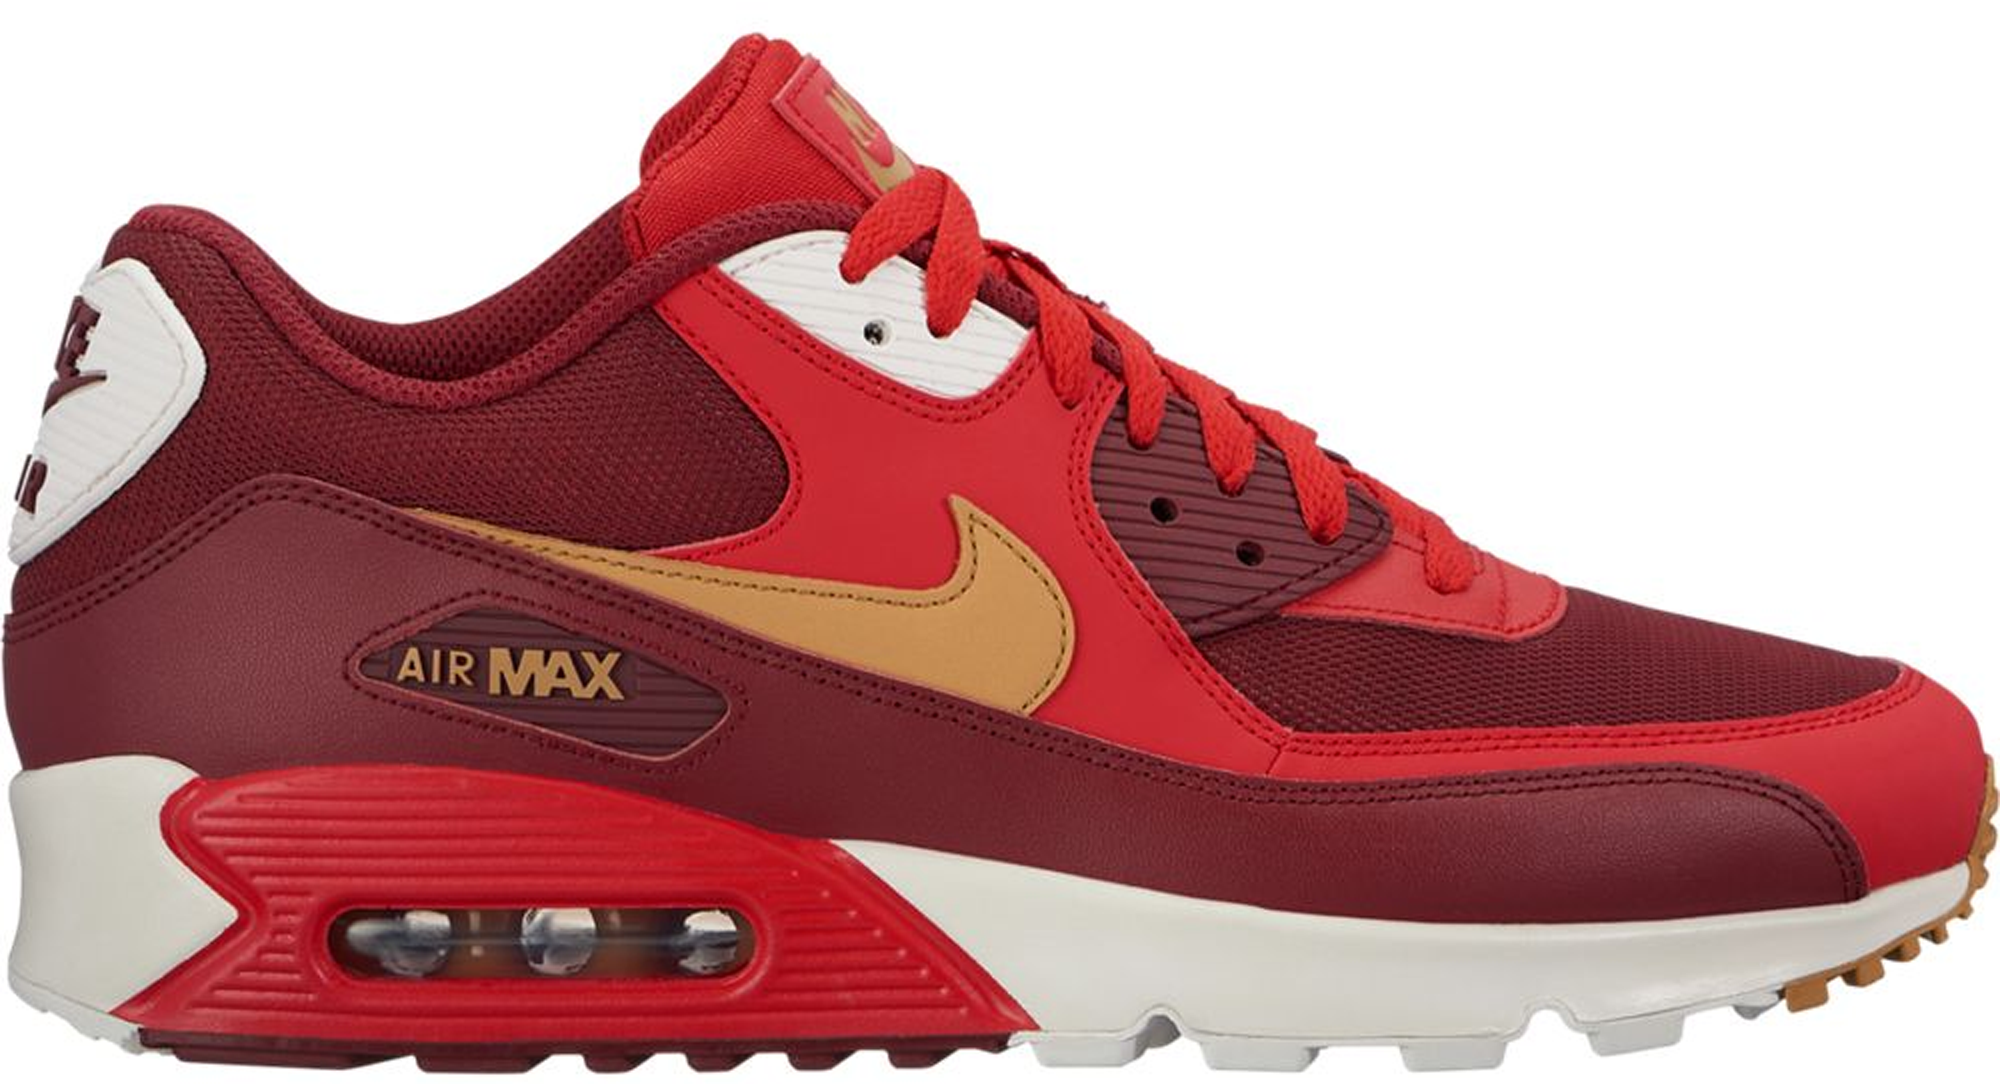 gold and red nike sneakers